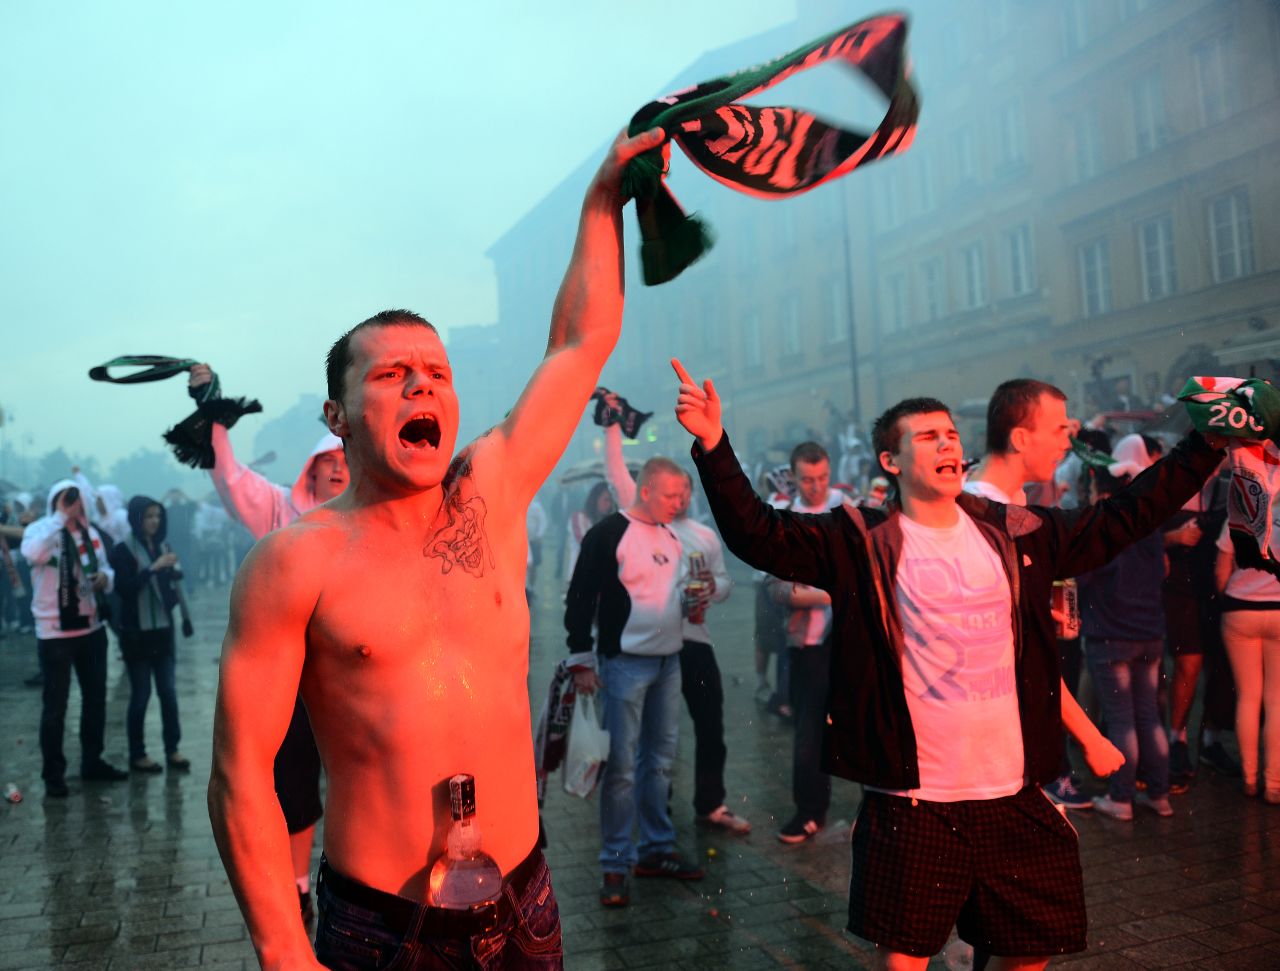 Legia Warsaw fans have been in trouble on countless occasions for racism and anti-Semitism, including at a home game against Israeli side Hapoel Tel Aviv in 2011.